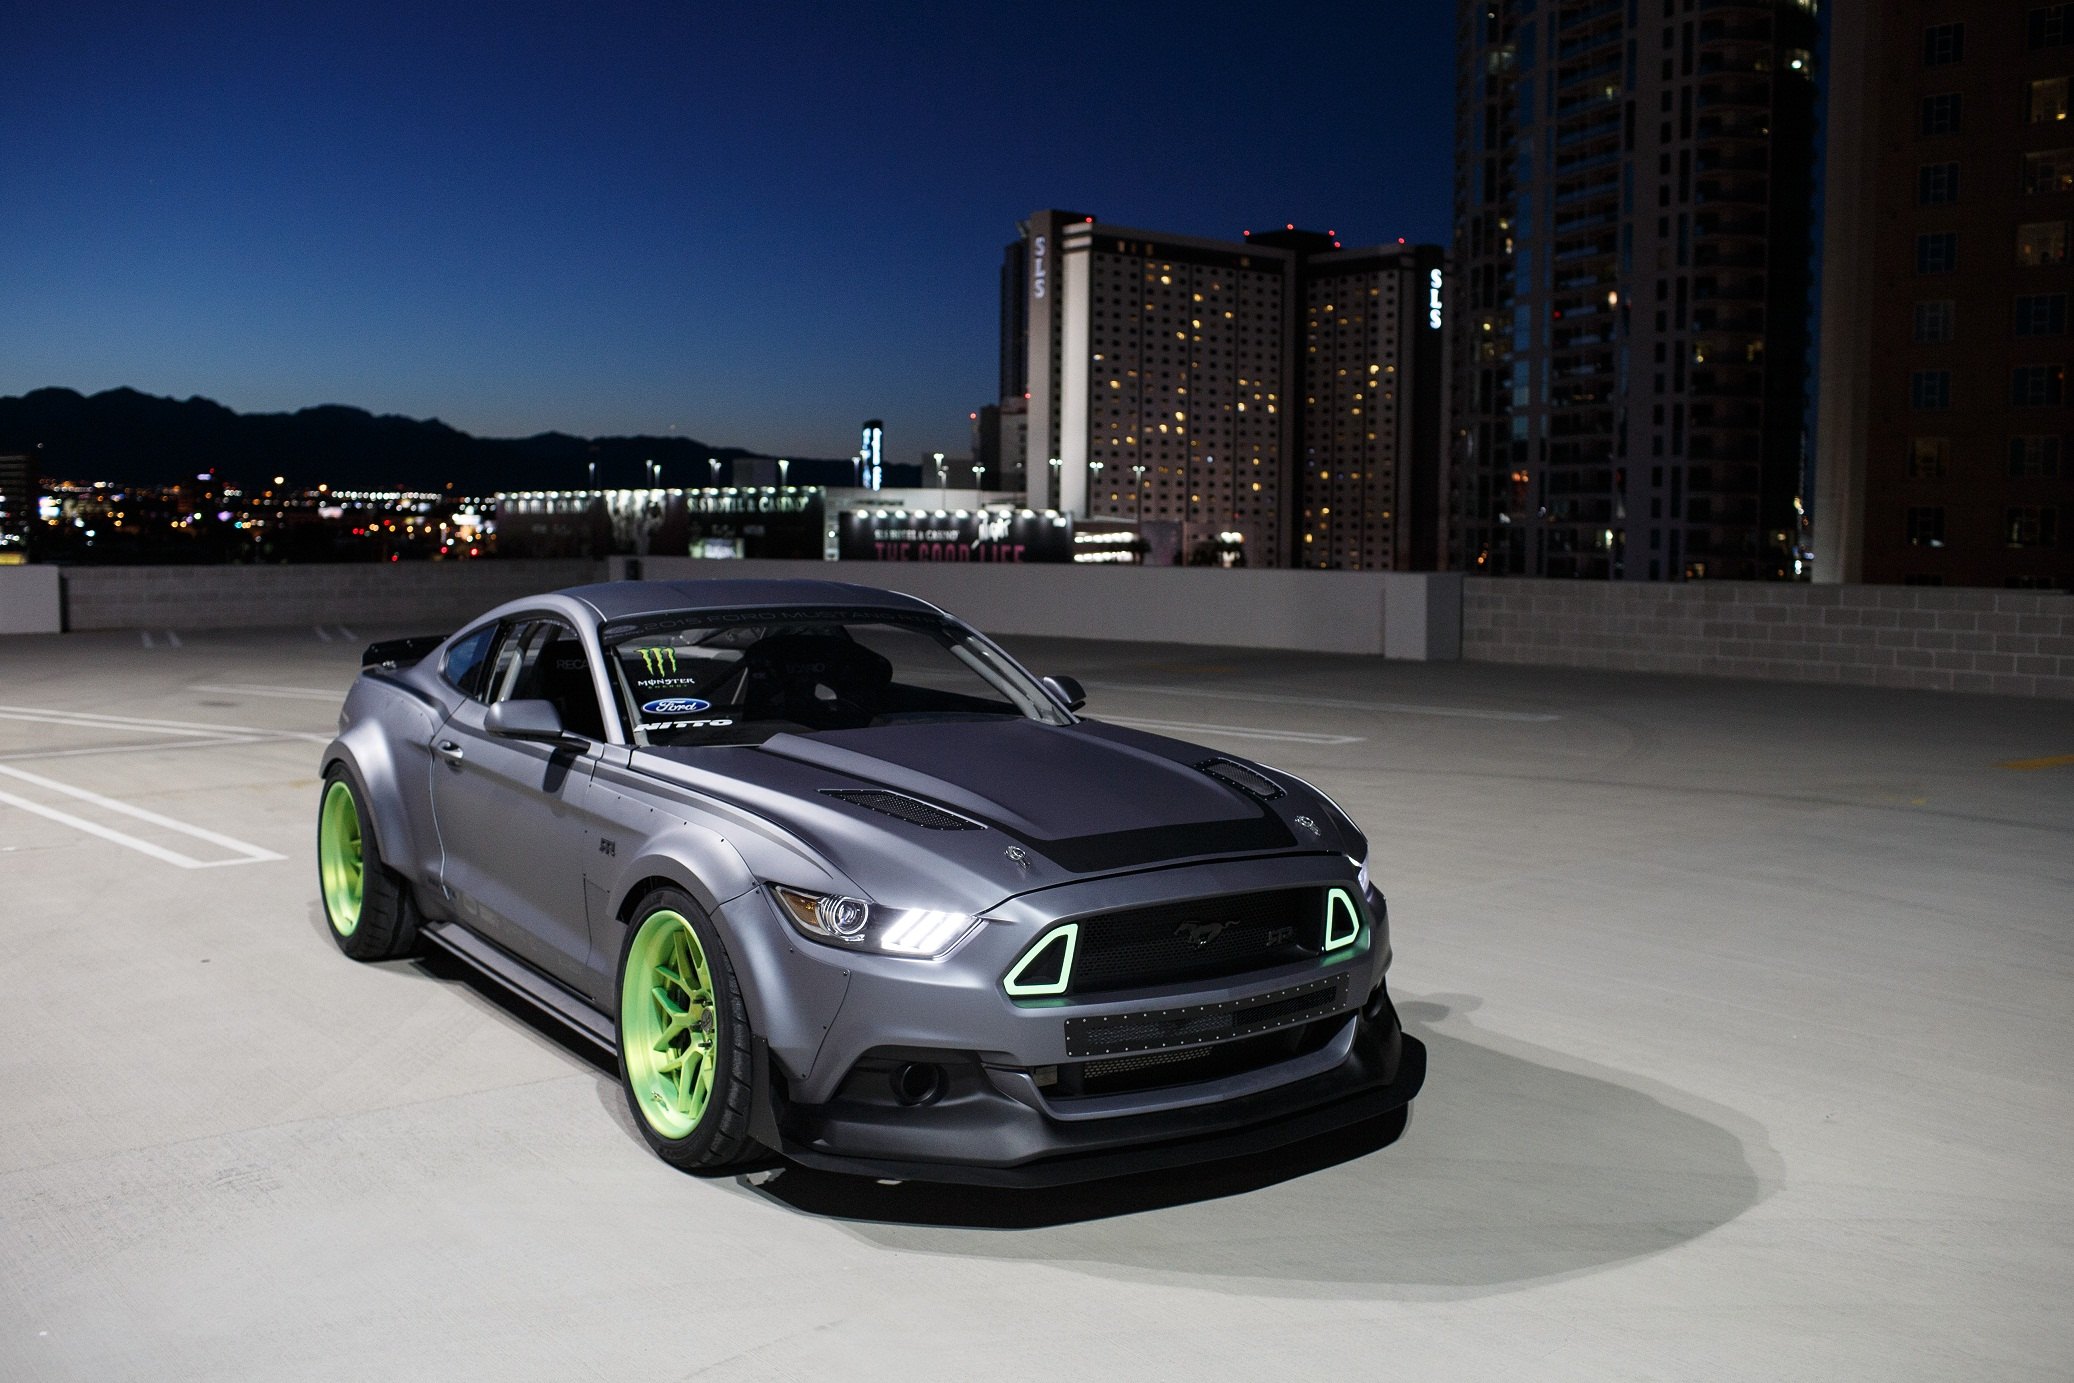 Drift Spec Rtr Ford Mustang Gt With Overfenders Carid Com Gallery